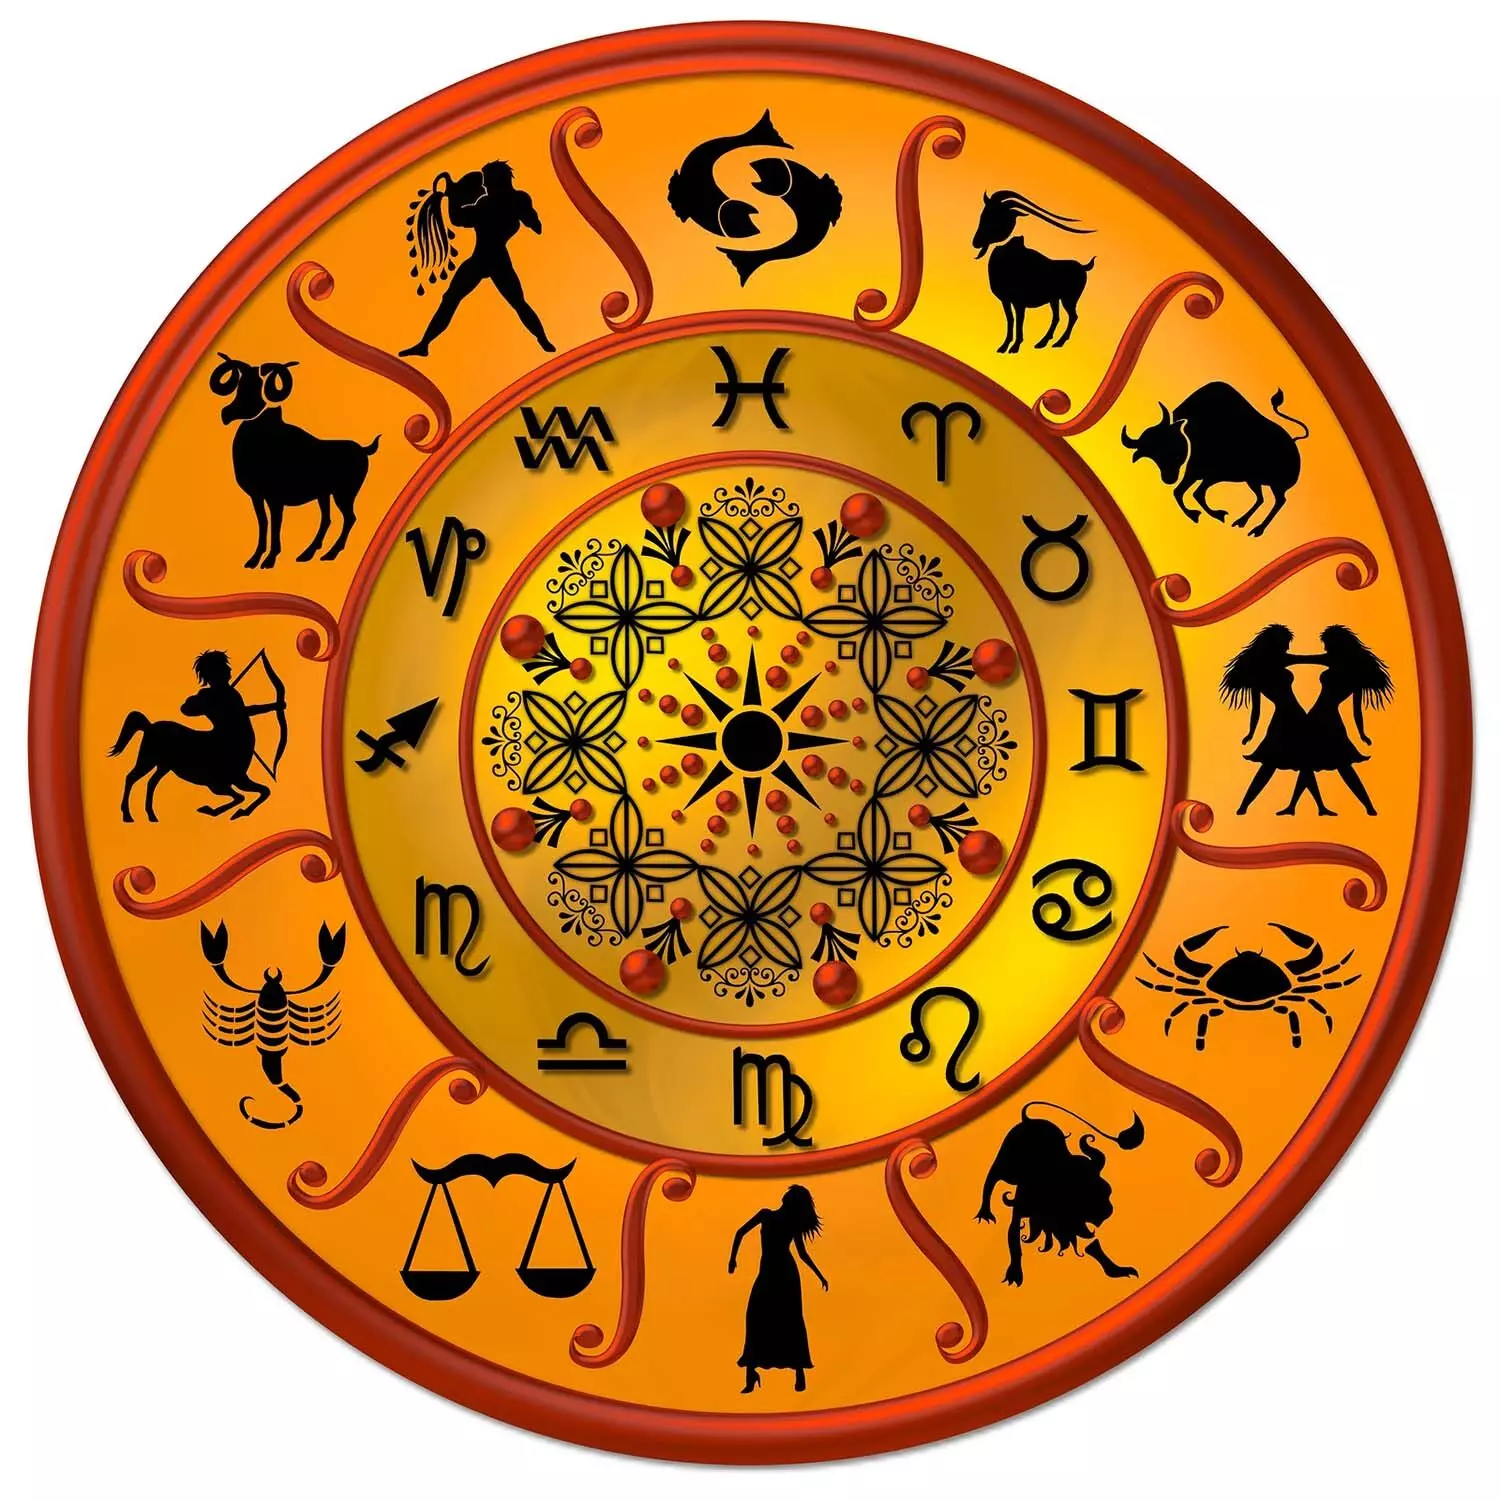 08 August  – Know your todays horoscope